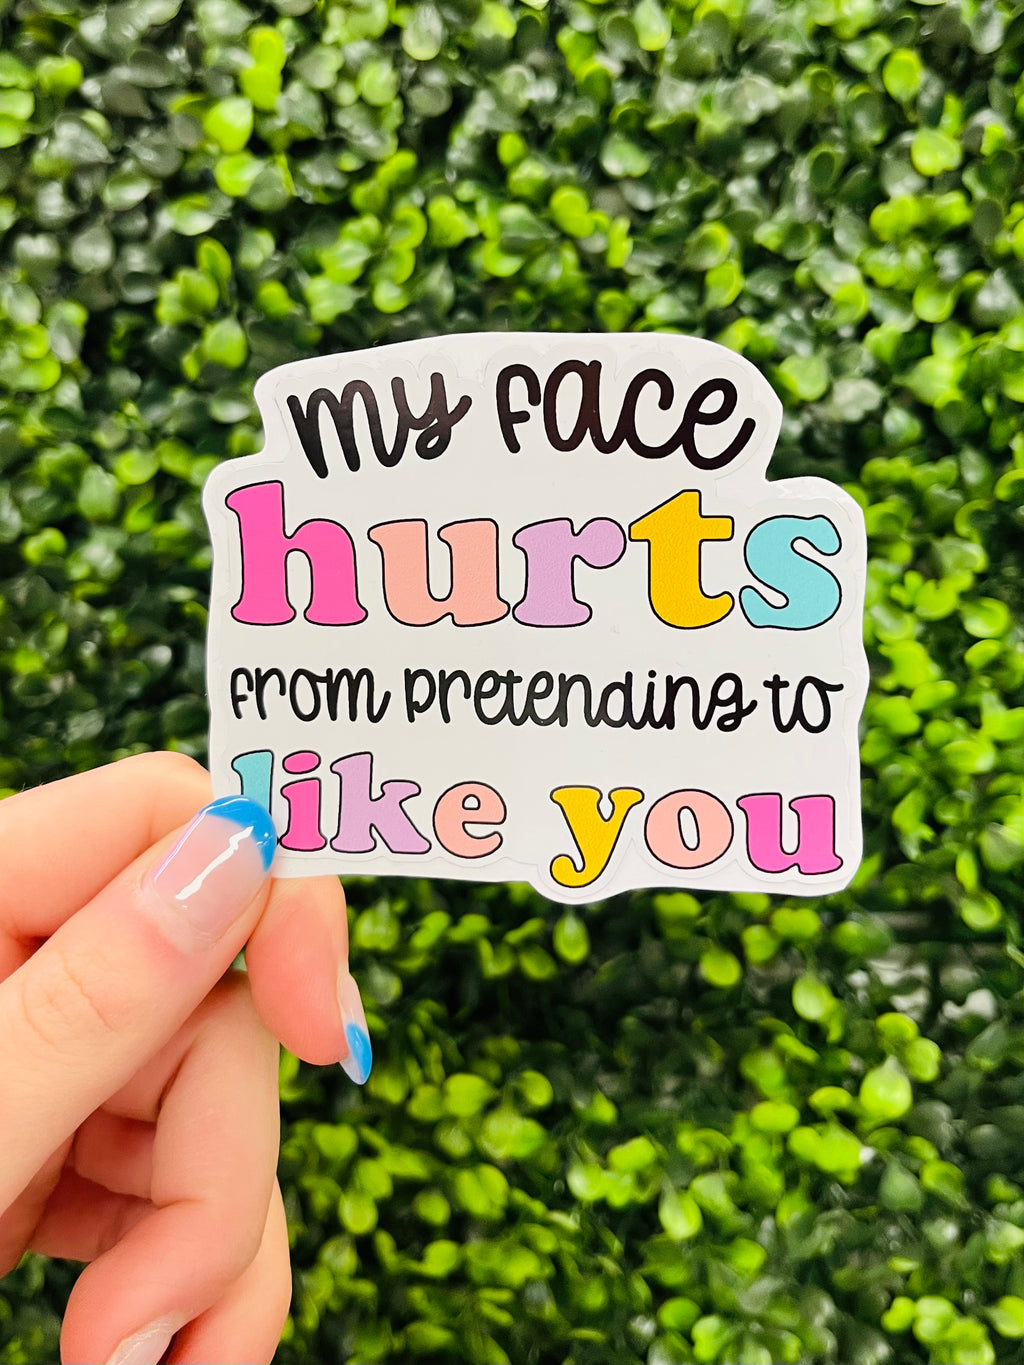 Make sure that everyone knows where you stand with this "My Face Hurts" sticker decal - perfect for spicing up your water bottle or laptop! Let 'em know you're straight-up not here for the fake friendship with this funny and unique sticker. Face-ache free fun guaranteed!